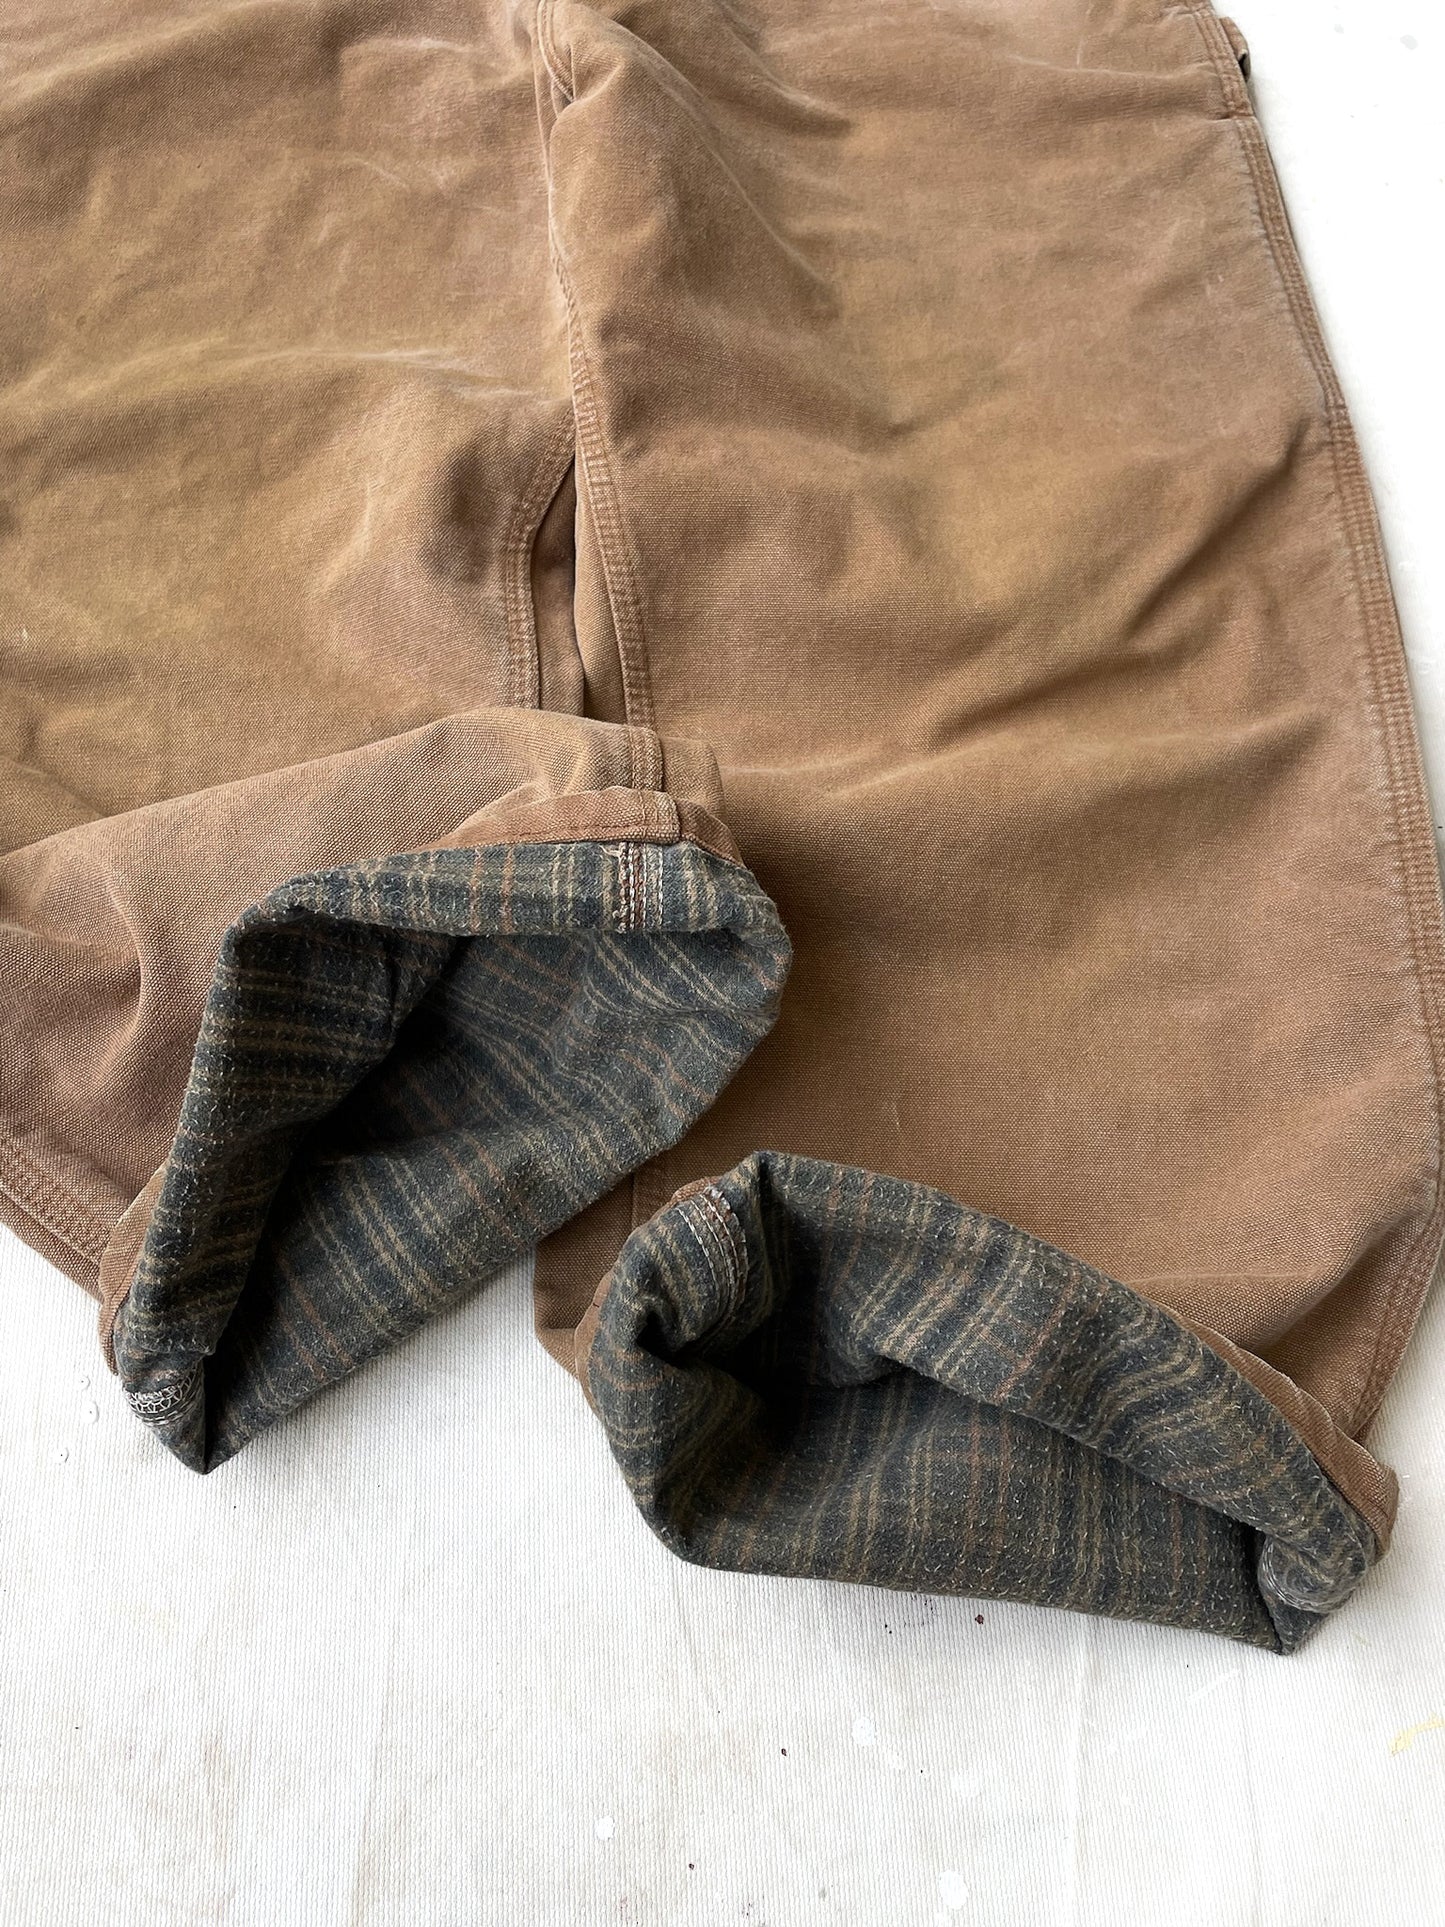 Carhartt Flannel Lined Pants—[38x27]